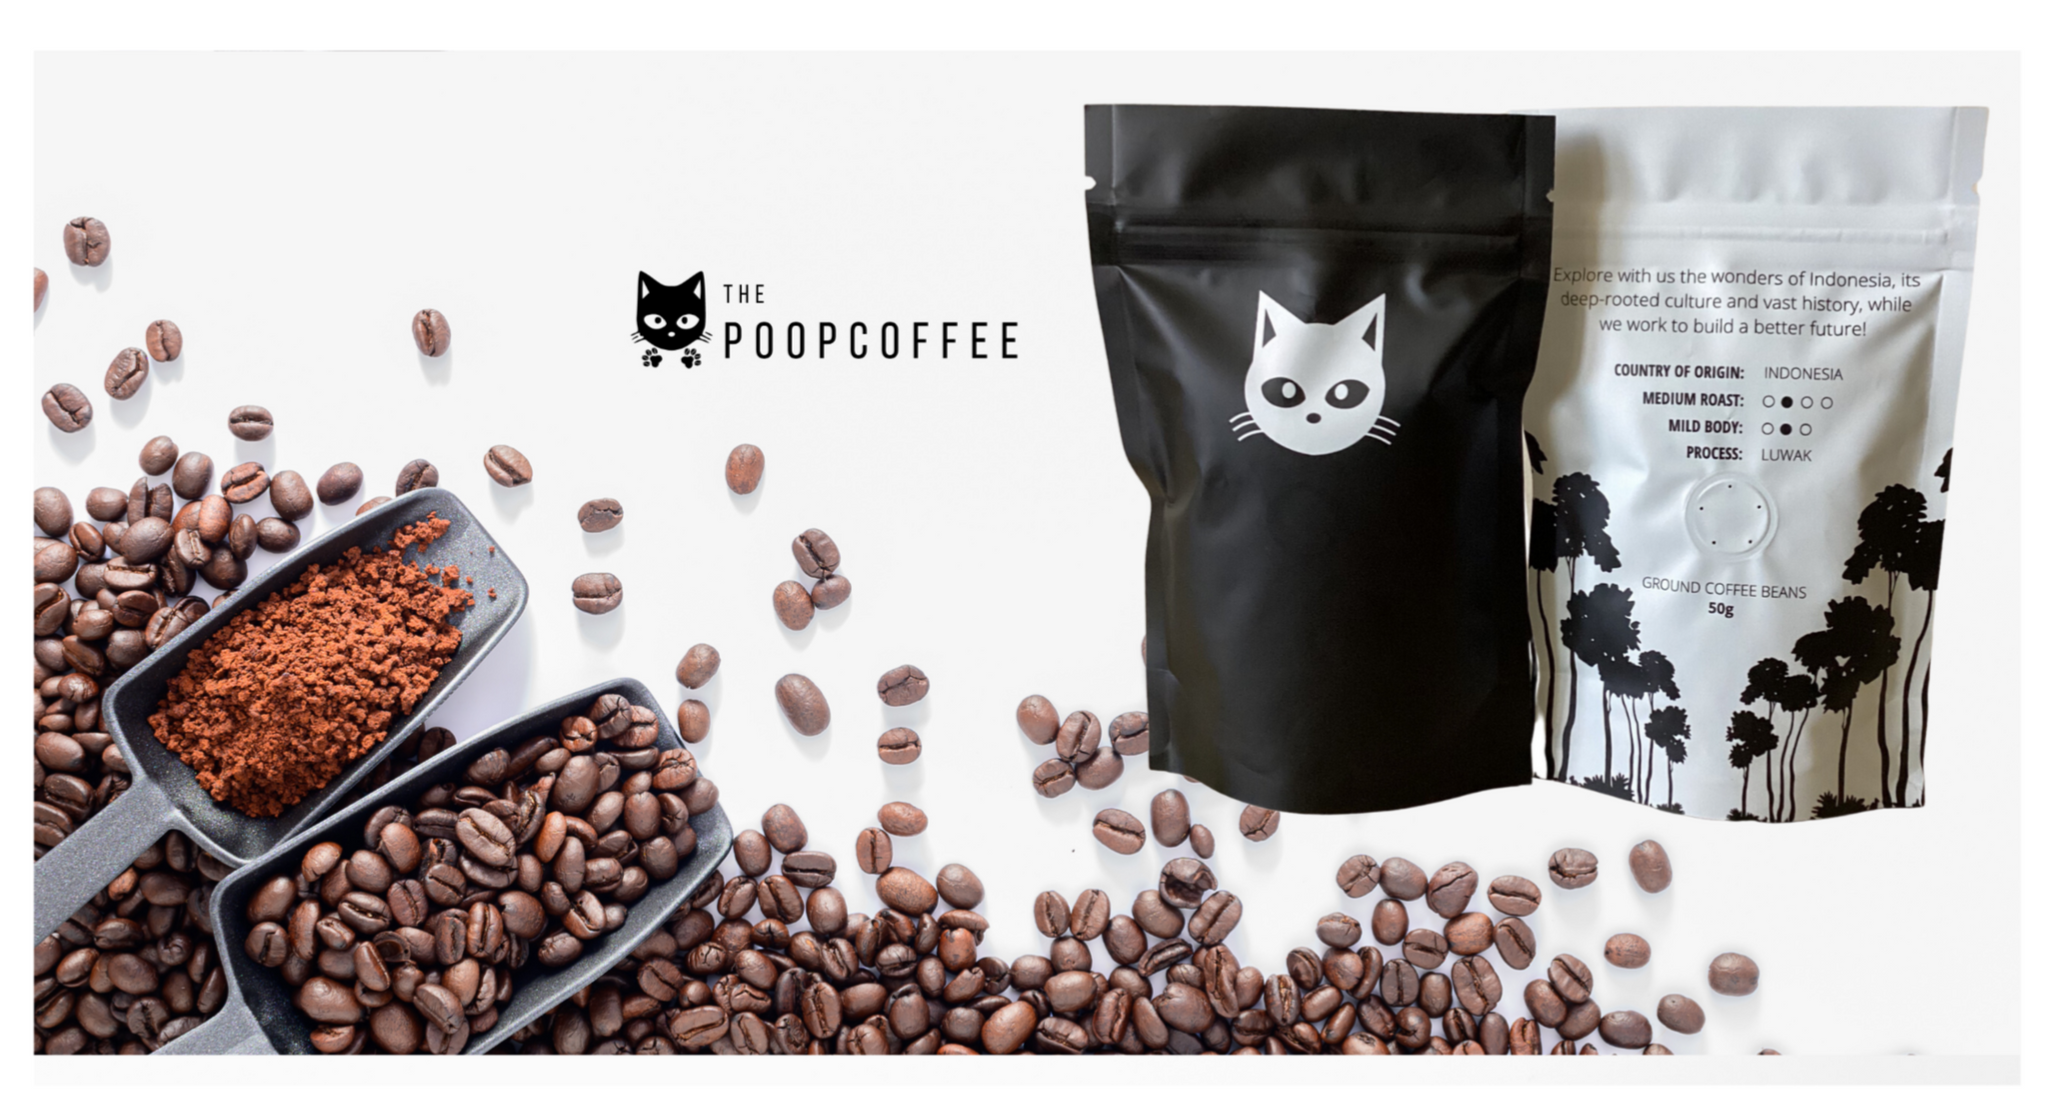 The Poop Coffee - Kopi Luwak Coffee Collection Image with Beans and Grounds next to Coffee Pouches